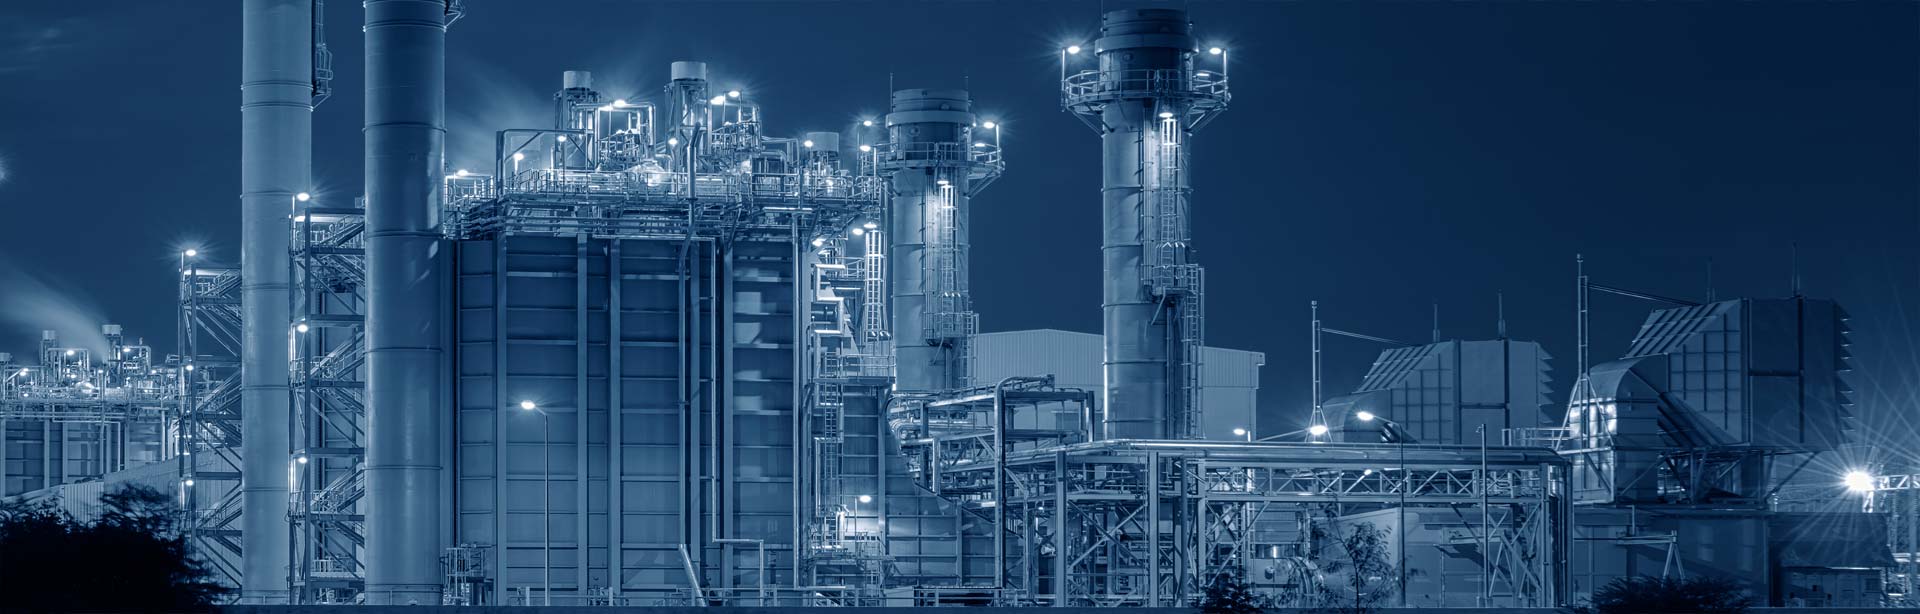 Night image of a power plant